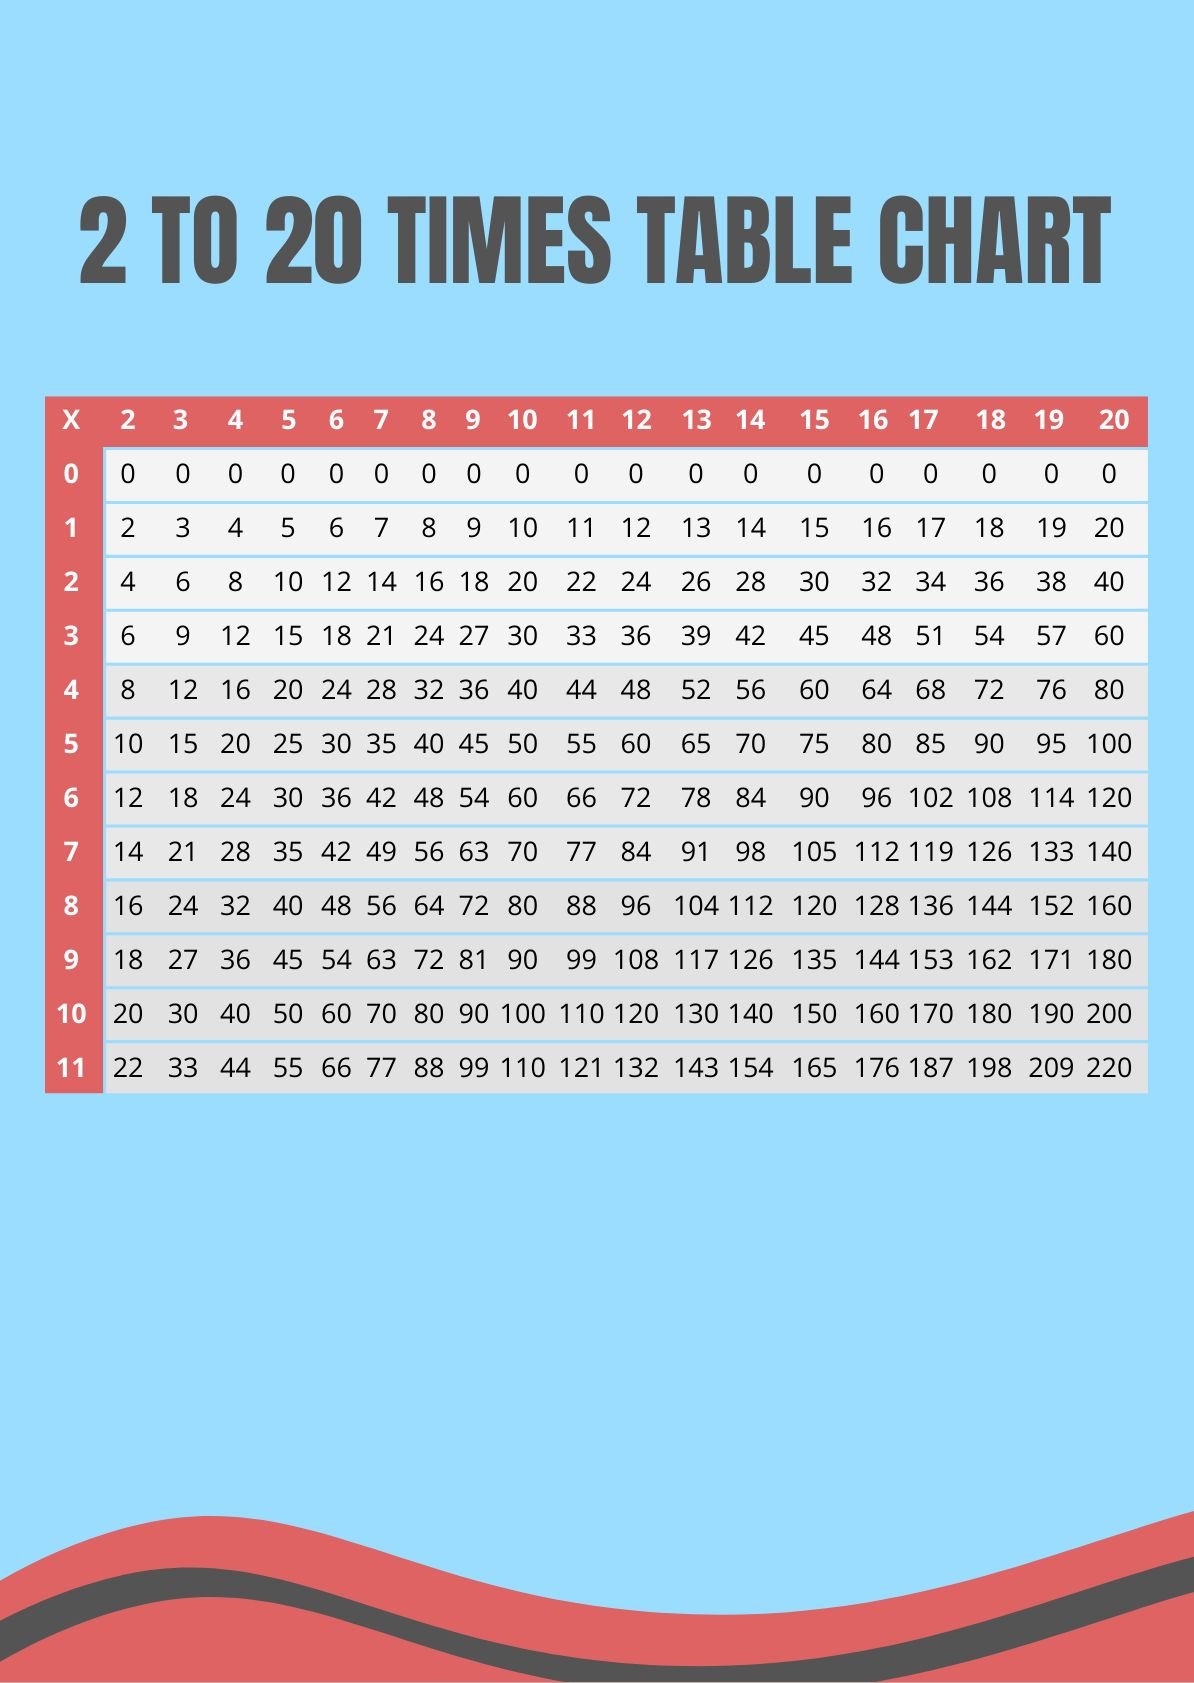 2 To 20 Time Table Chart  in PDF